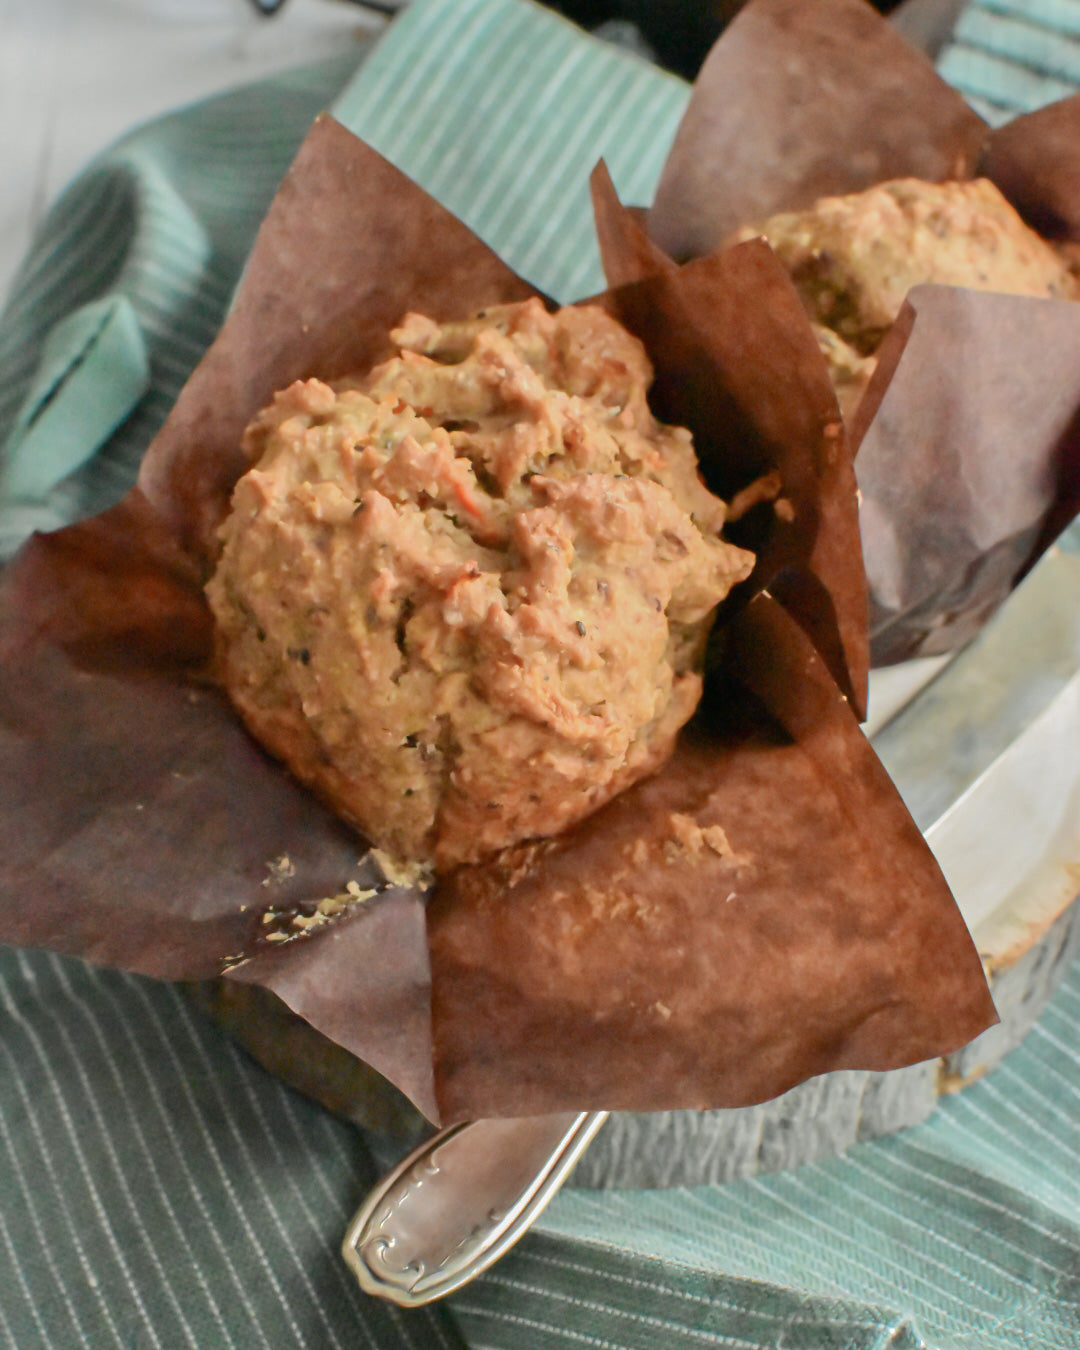 Carrot with Walnut Muffin (gf oat flour)